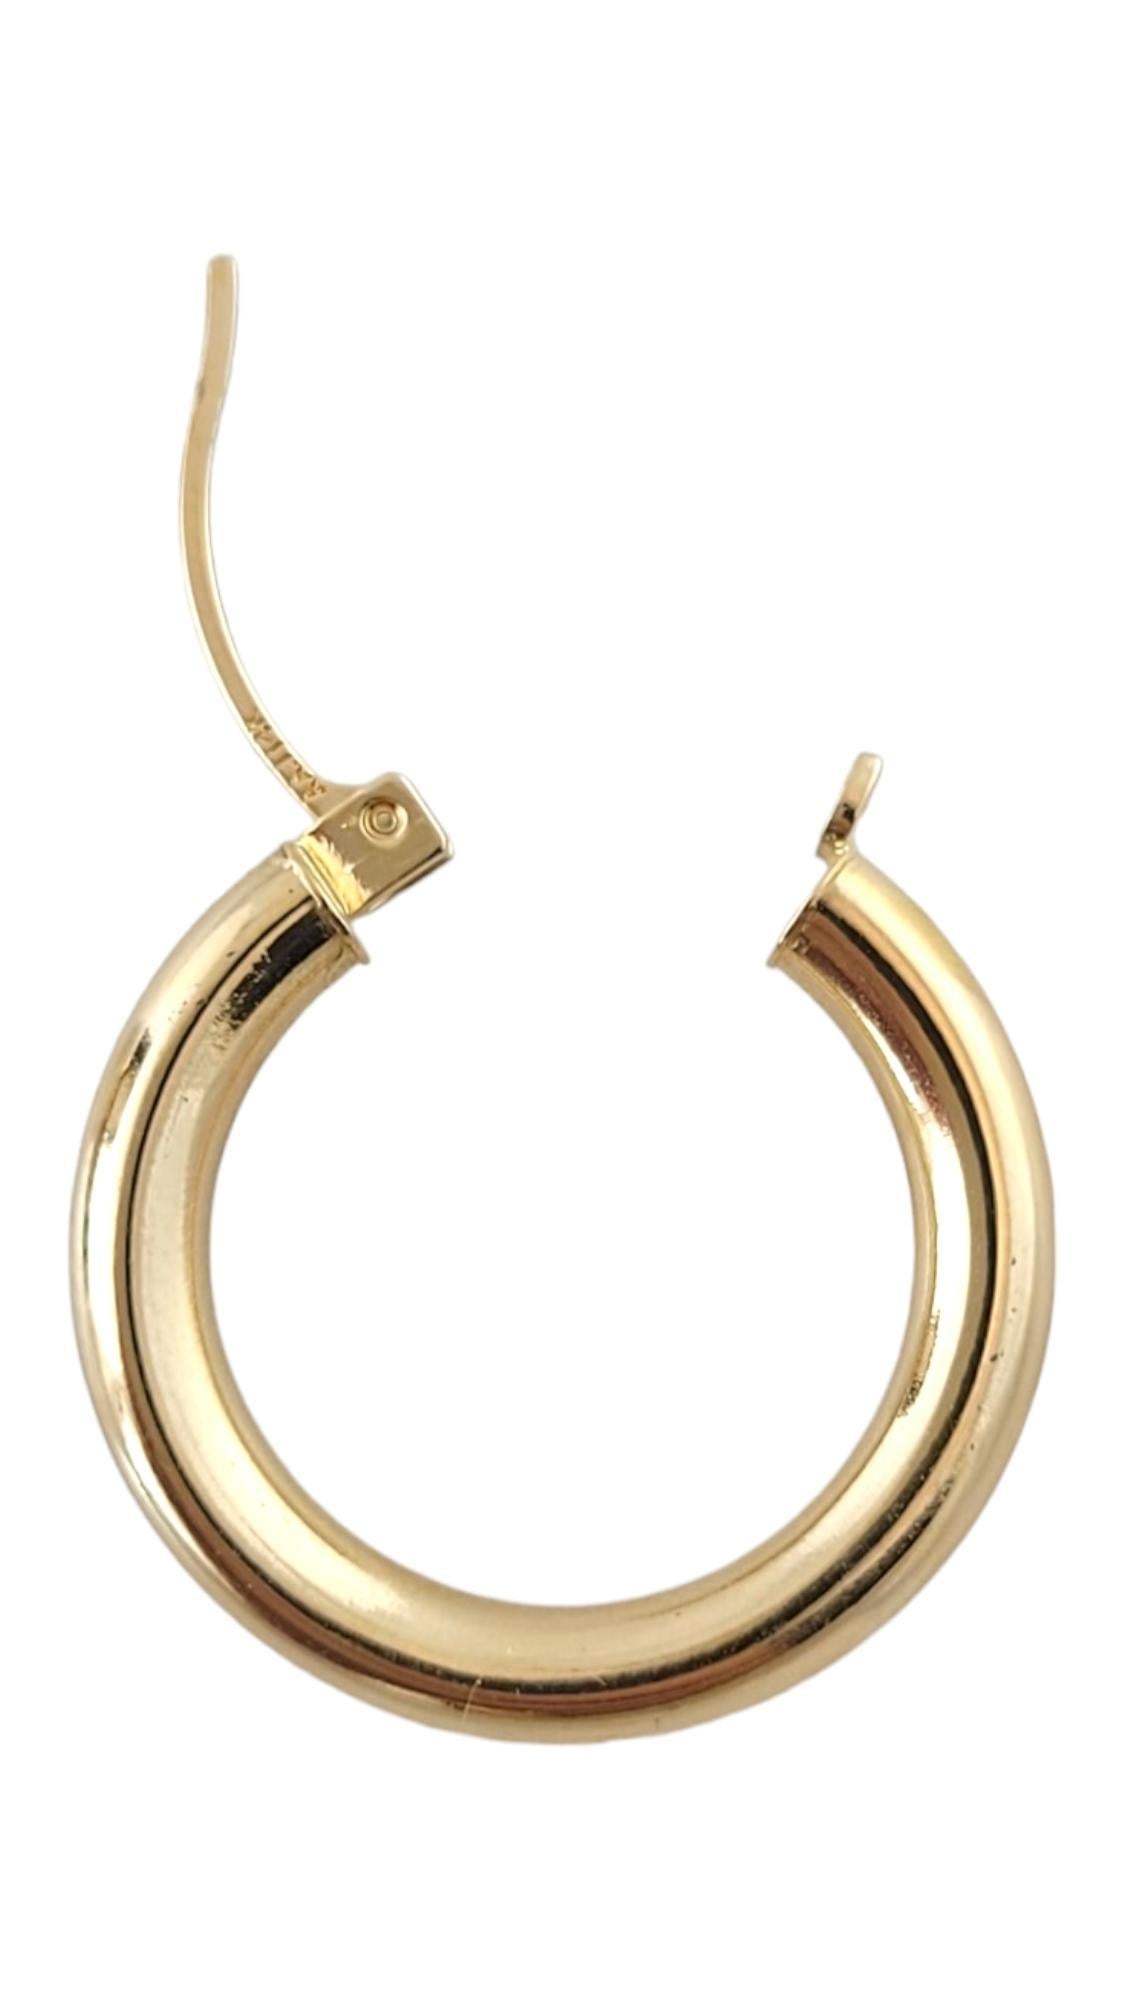 14K Yellow Gold Hoop Earrings #17379 In Good Condition For Sale In Washington Depot, CT